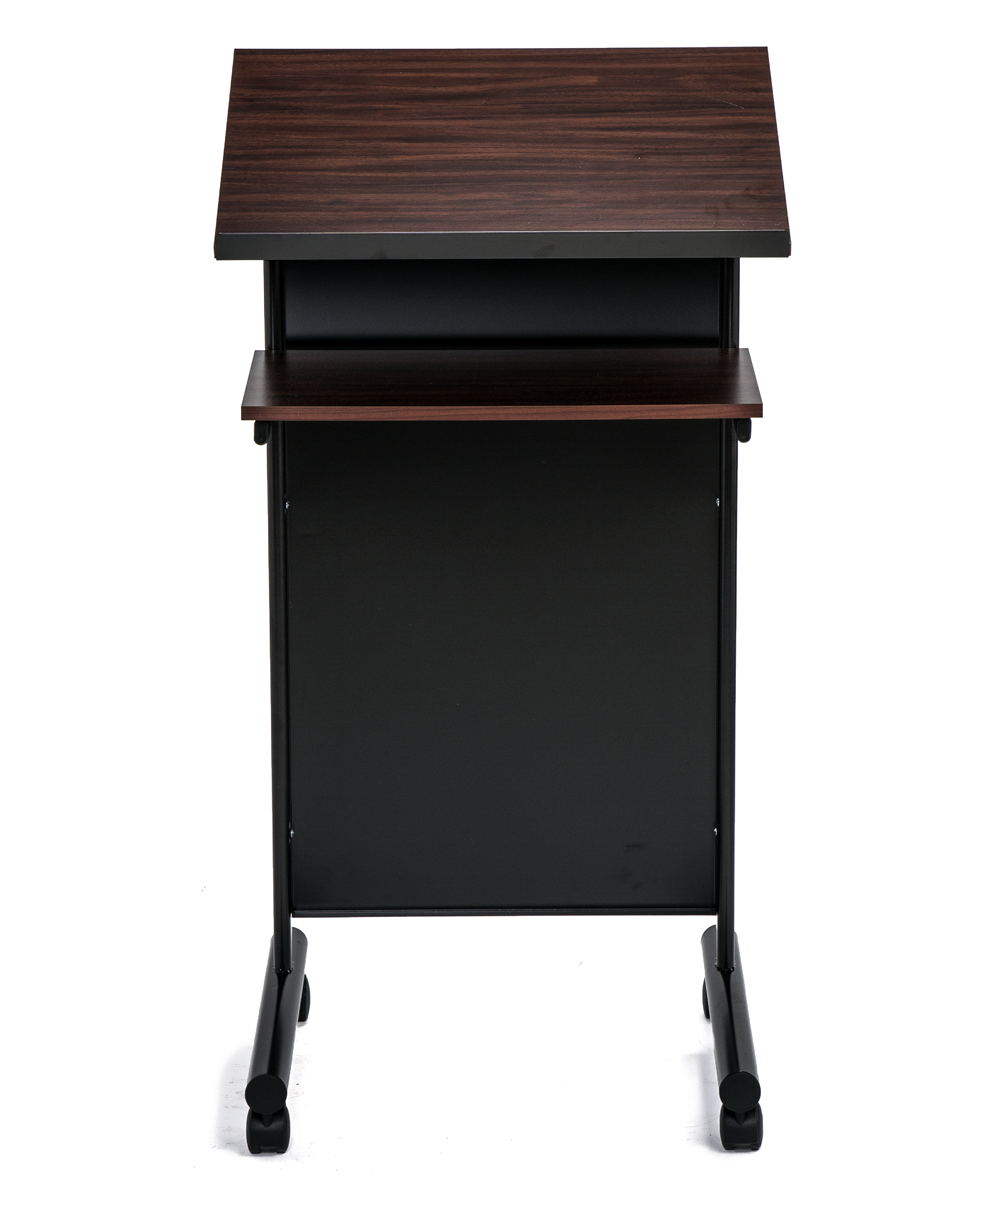 Wheeled Lectern with Storage Shelf - Cherry/Black - Compact Standing Desk for Reading - Laptop Stand. 2 Shelves with locking wheels. 